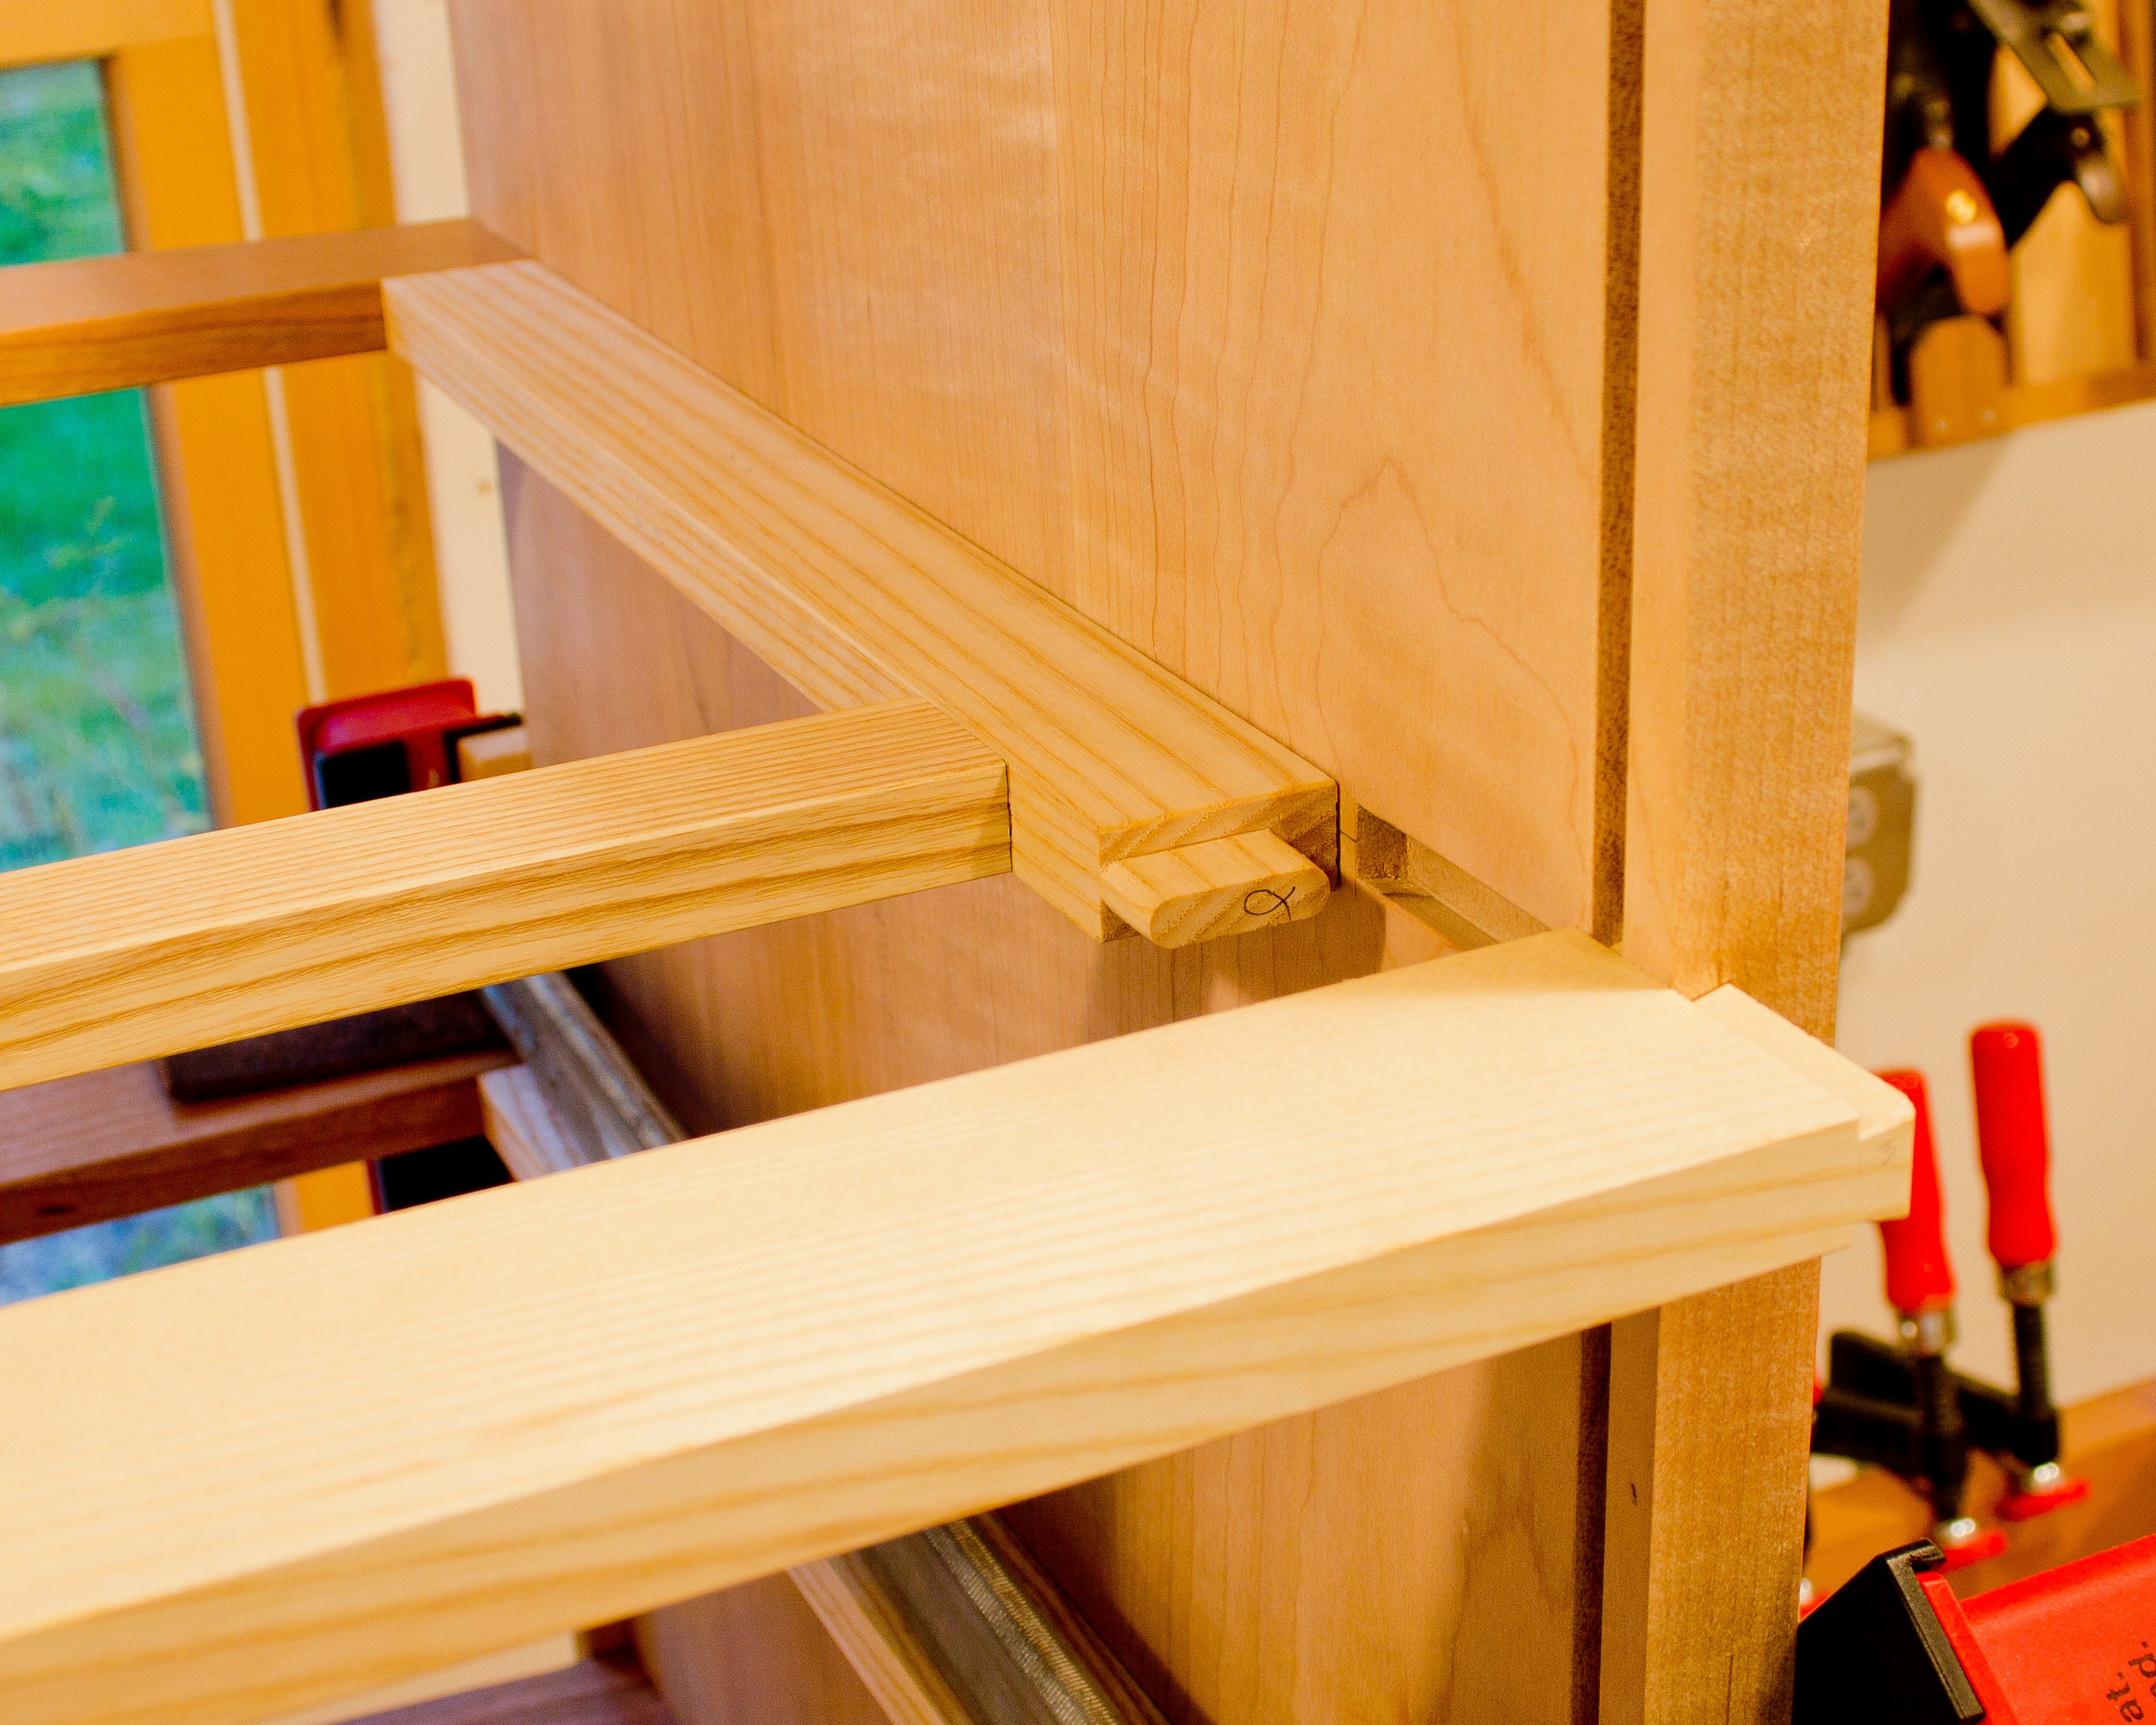  One of the rear horizontal dividers awaiting it's turn with the clamps. &nbsp;You can see the tenon on the end of the runner, which fits into a corresponding mortise in the divider. 